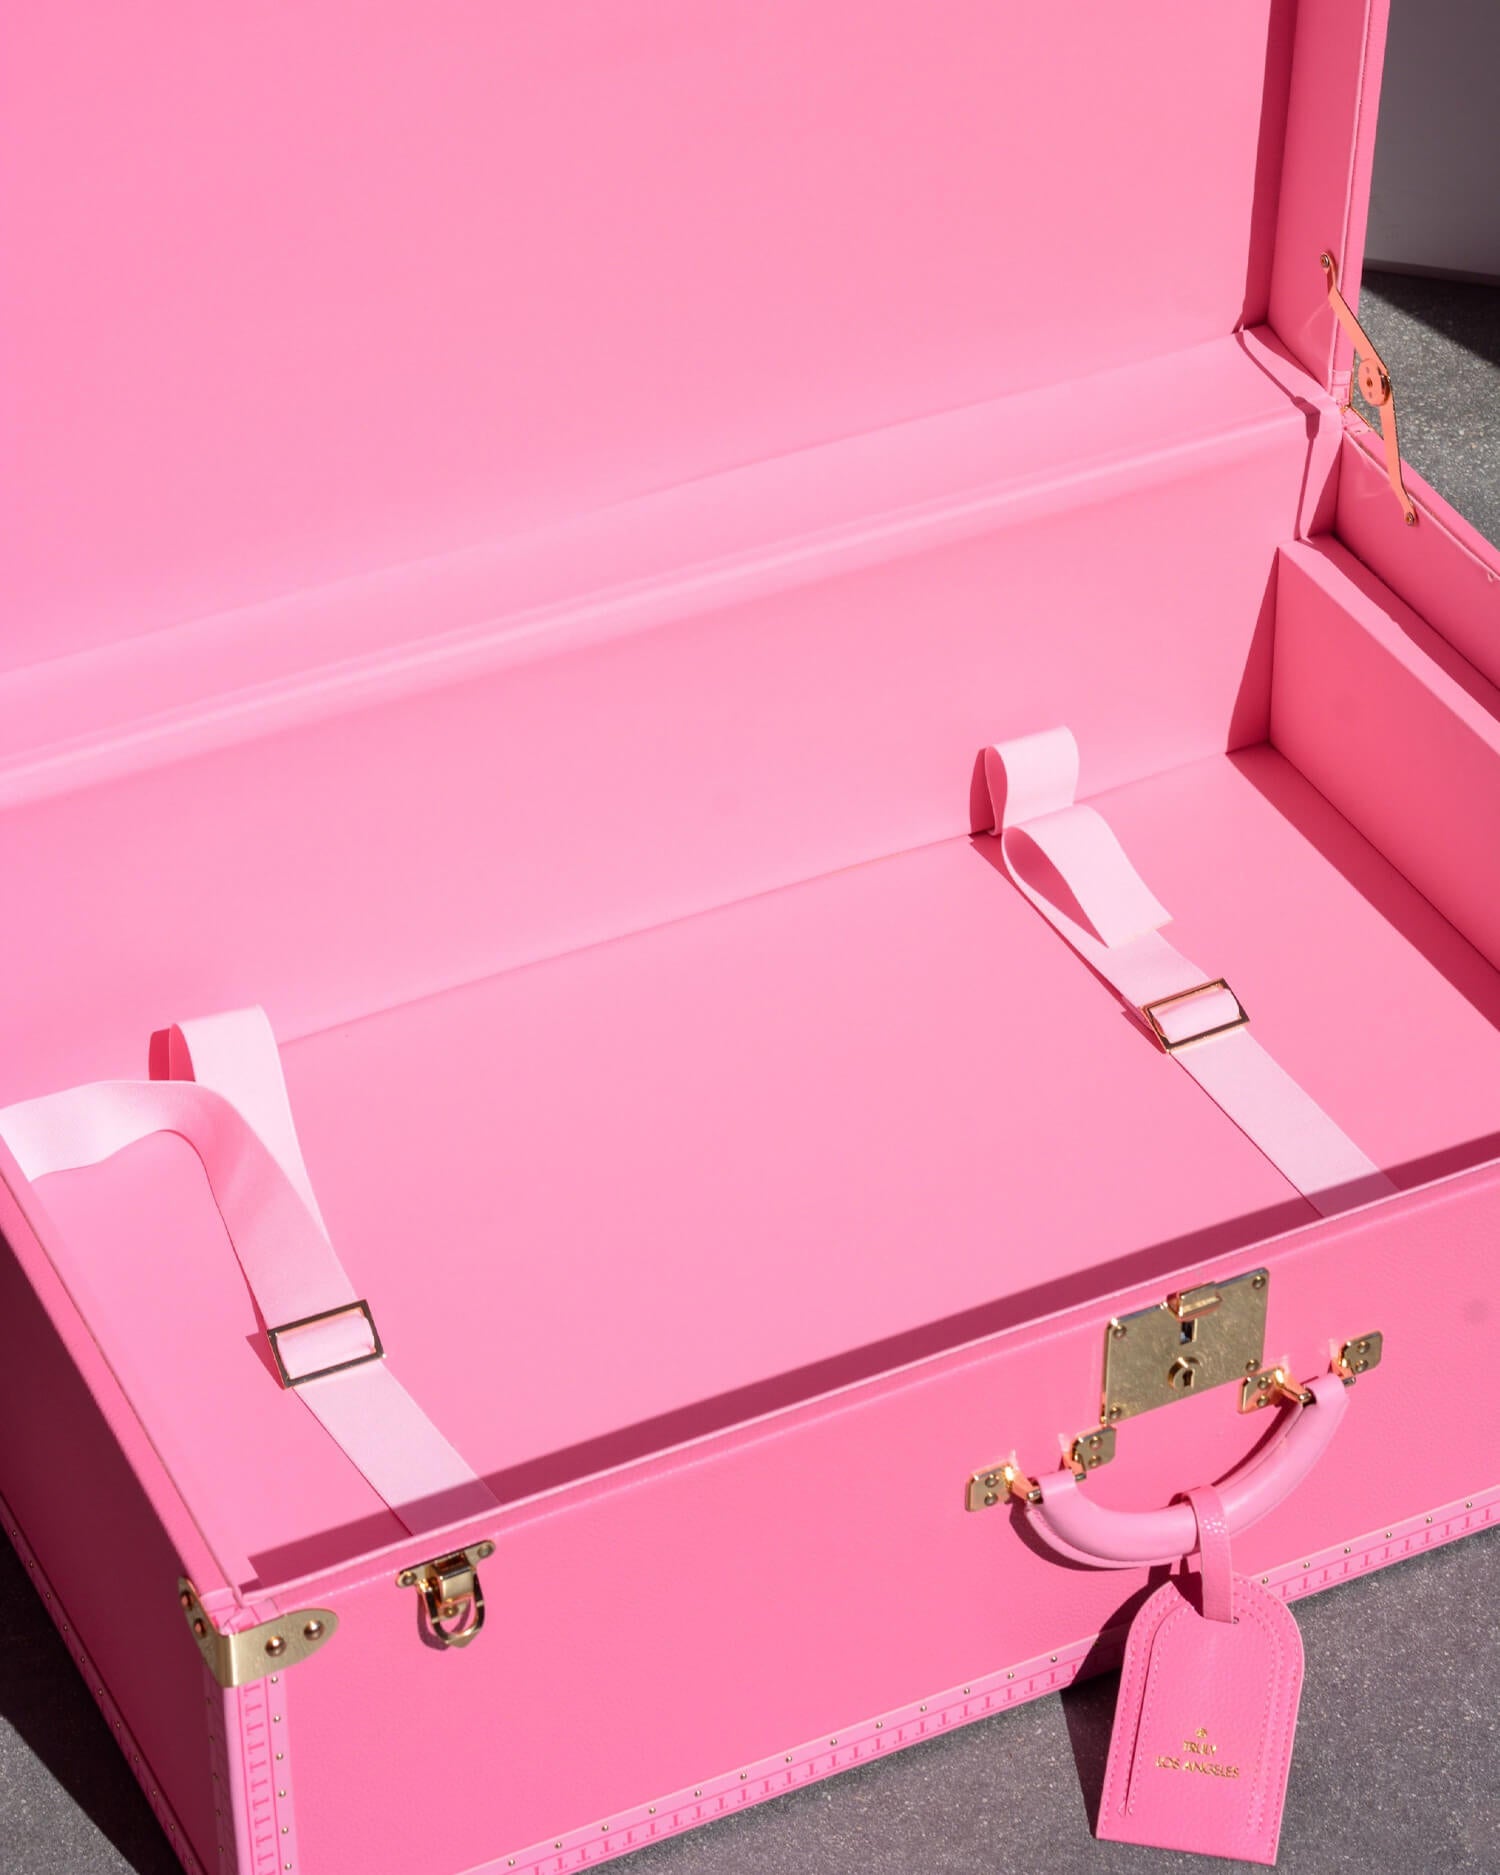 4 Luxury Trunk Makers Will Build the Bespoke Luggage of Your